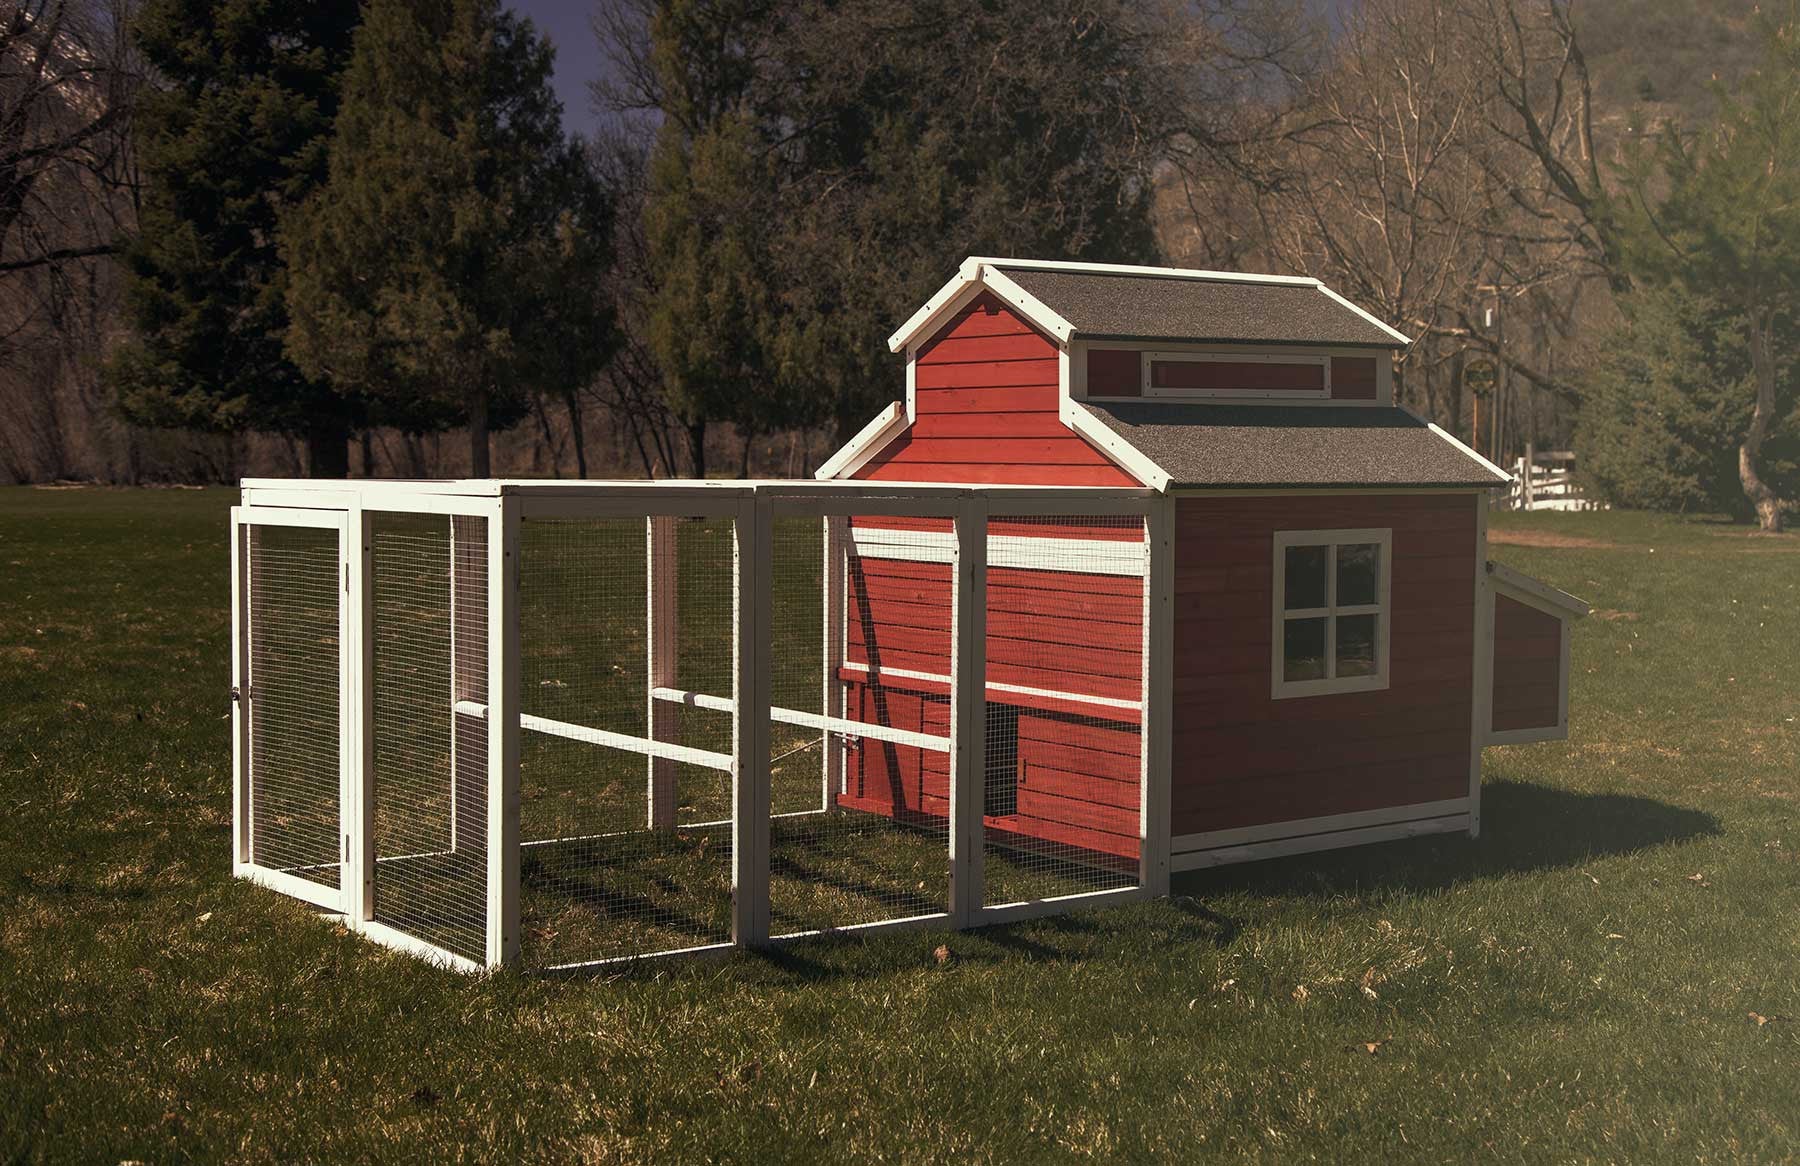 Another side of the Schoolhouse chicken coop, revealing a four-paned window and the traditional red and white schoolhouse paint